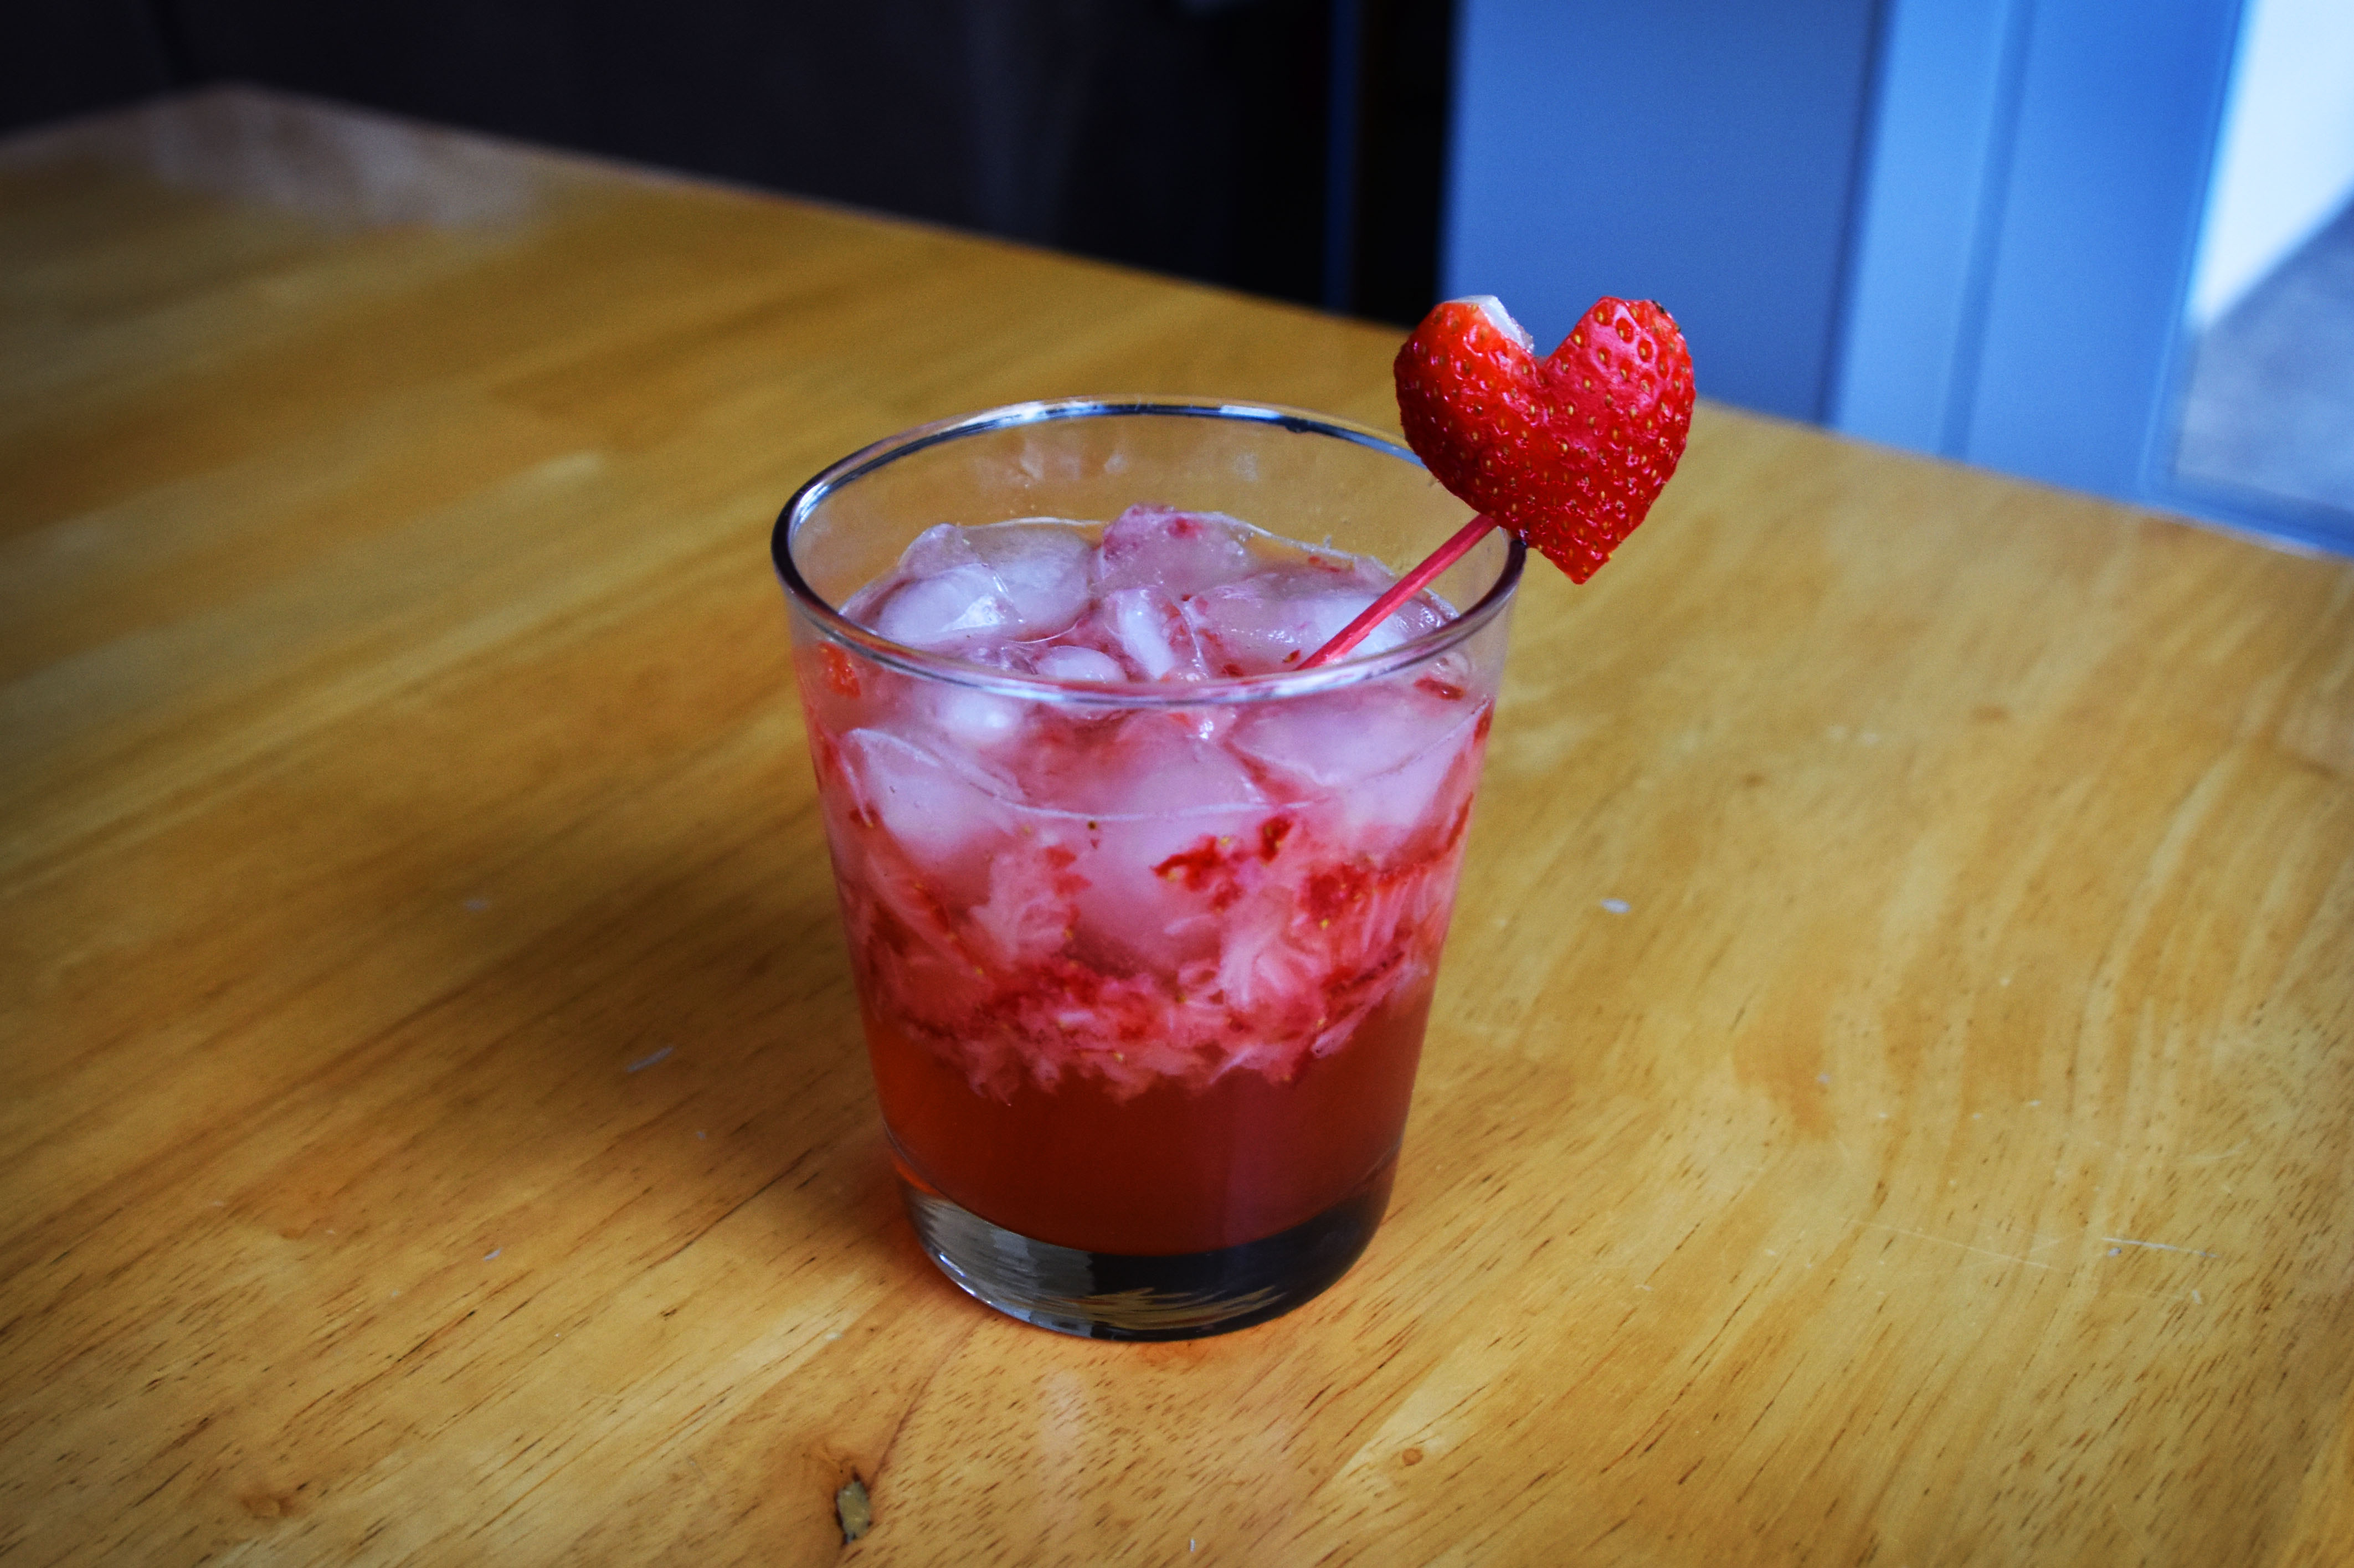 Mix up some cocktails with Cupid